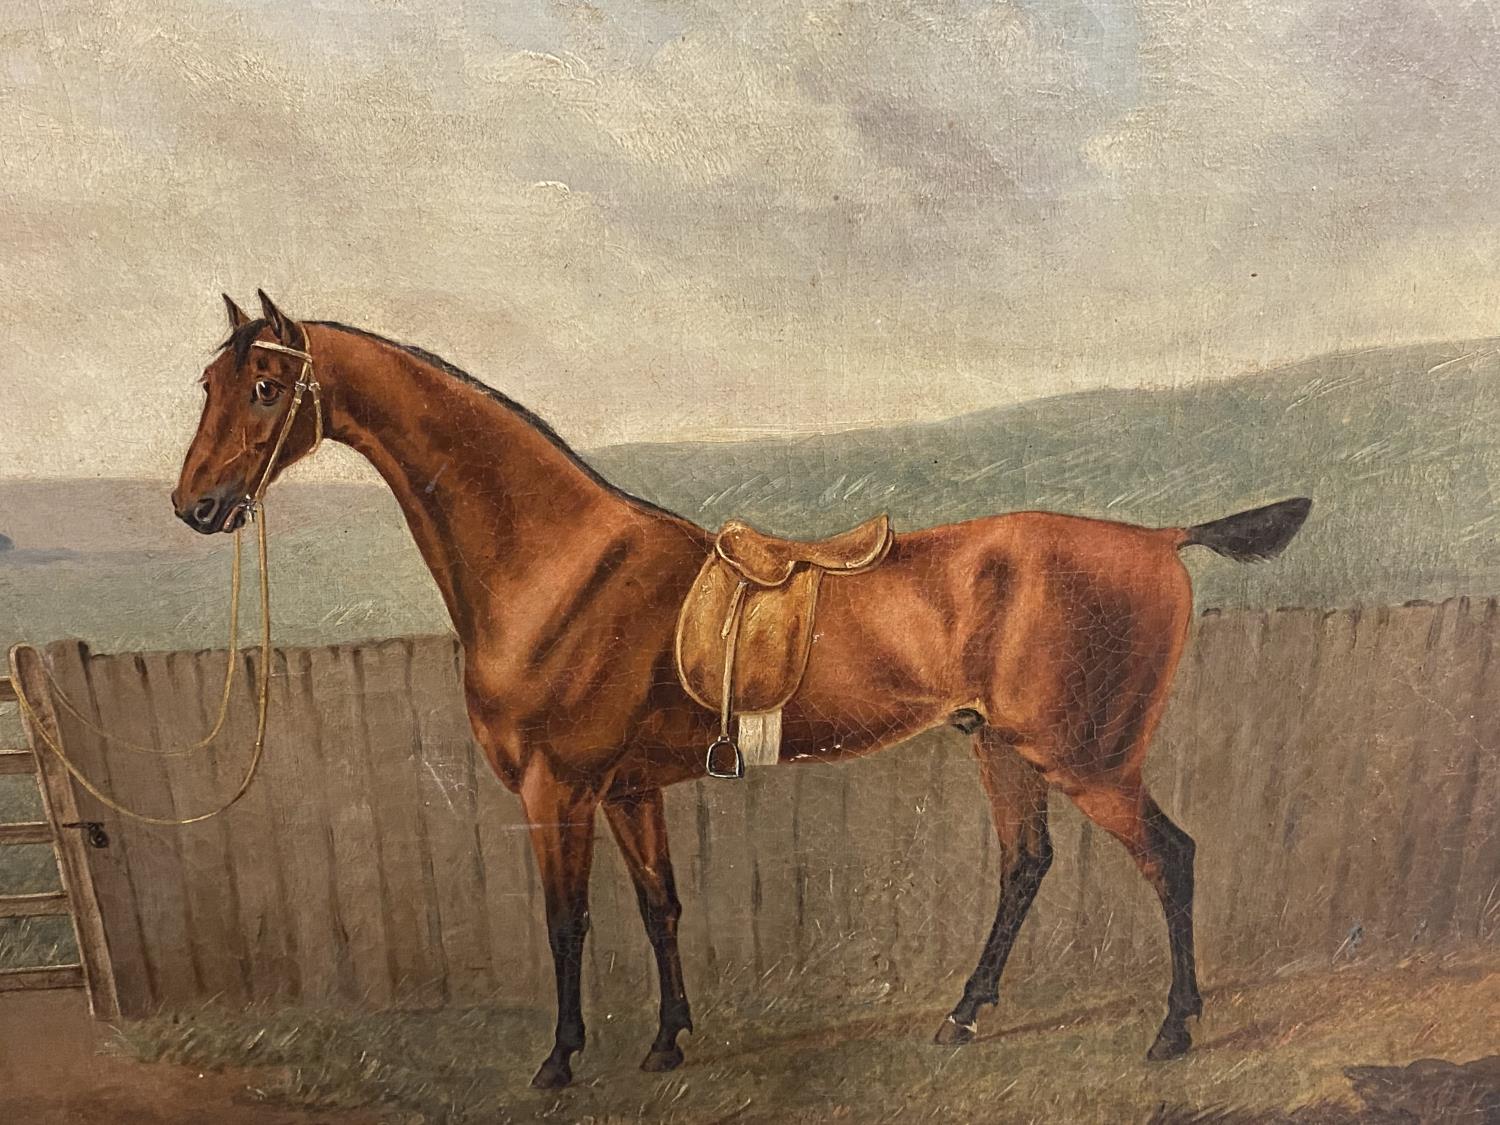 R P NODDER (ACT. 1795-1820), Oil on canvas, "Saddled bay hack by a gate" signed lower left, dated - Image 4 of 9